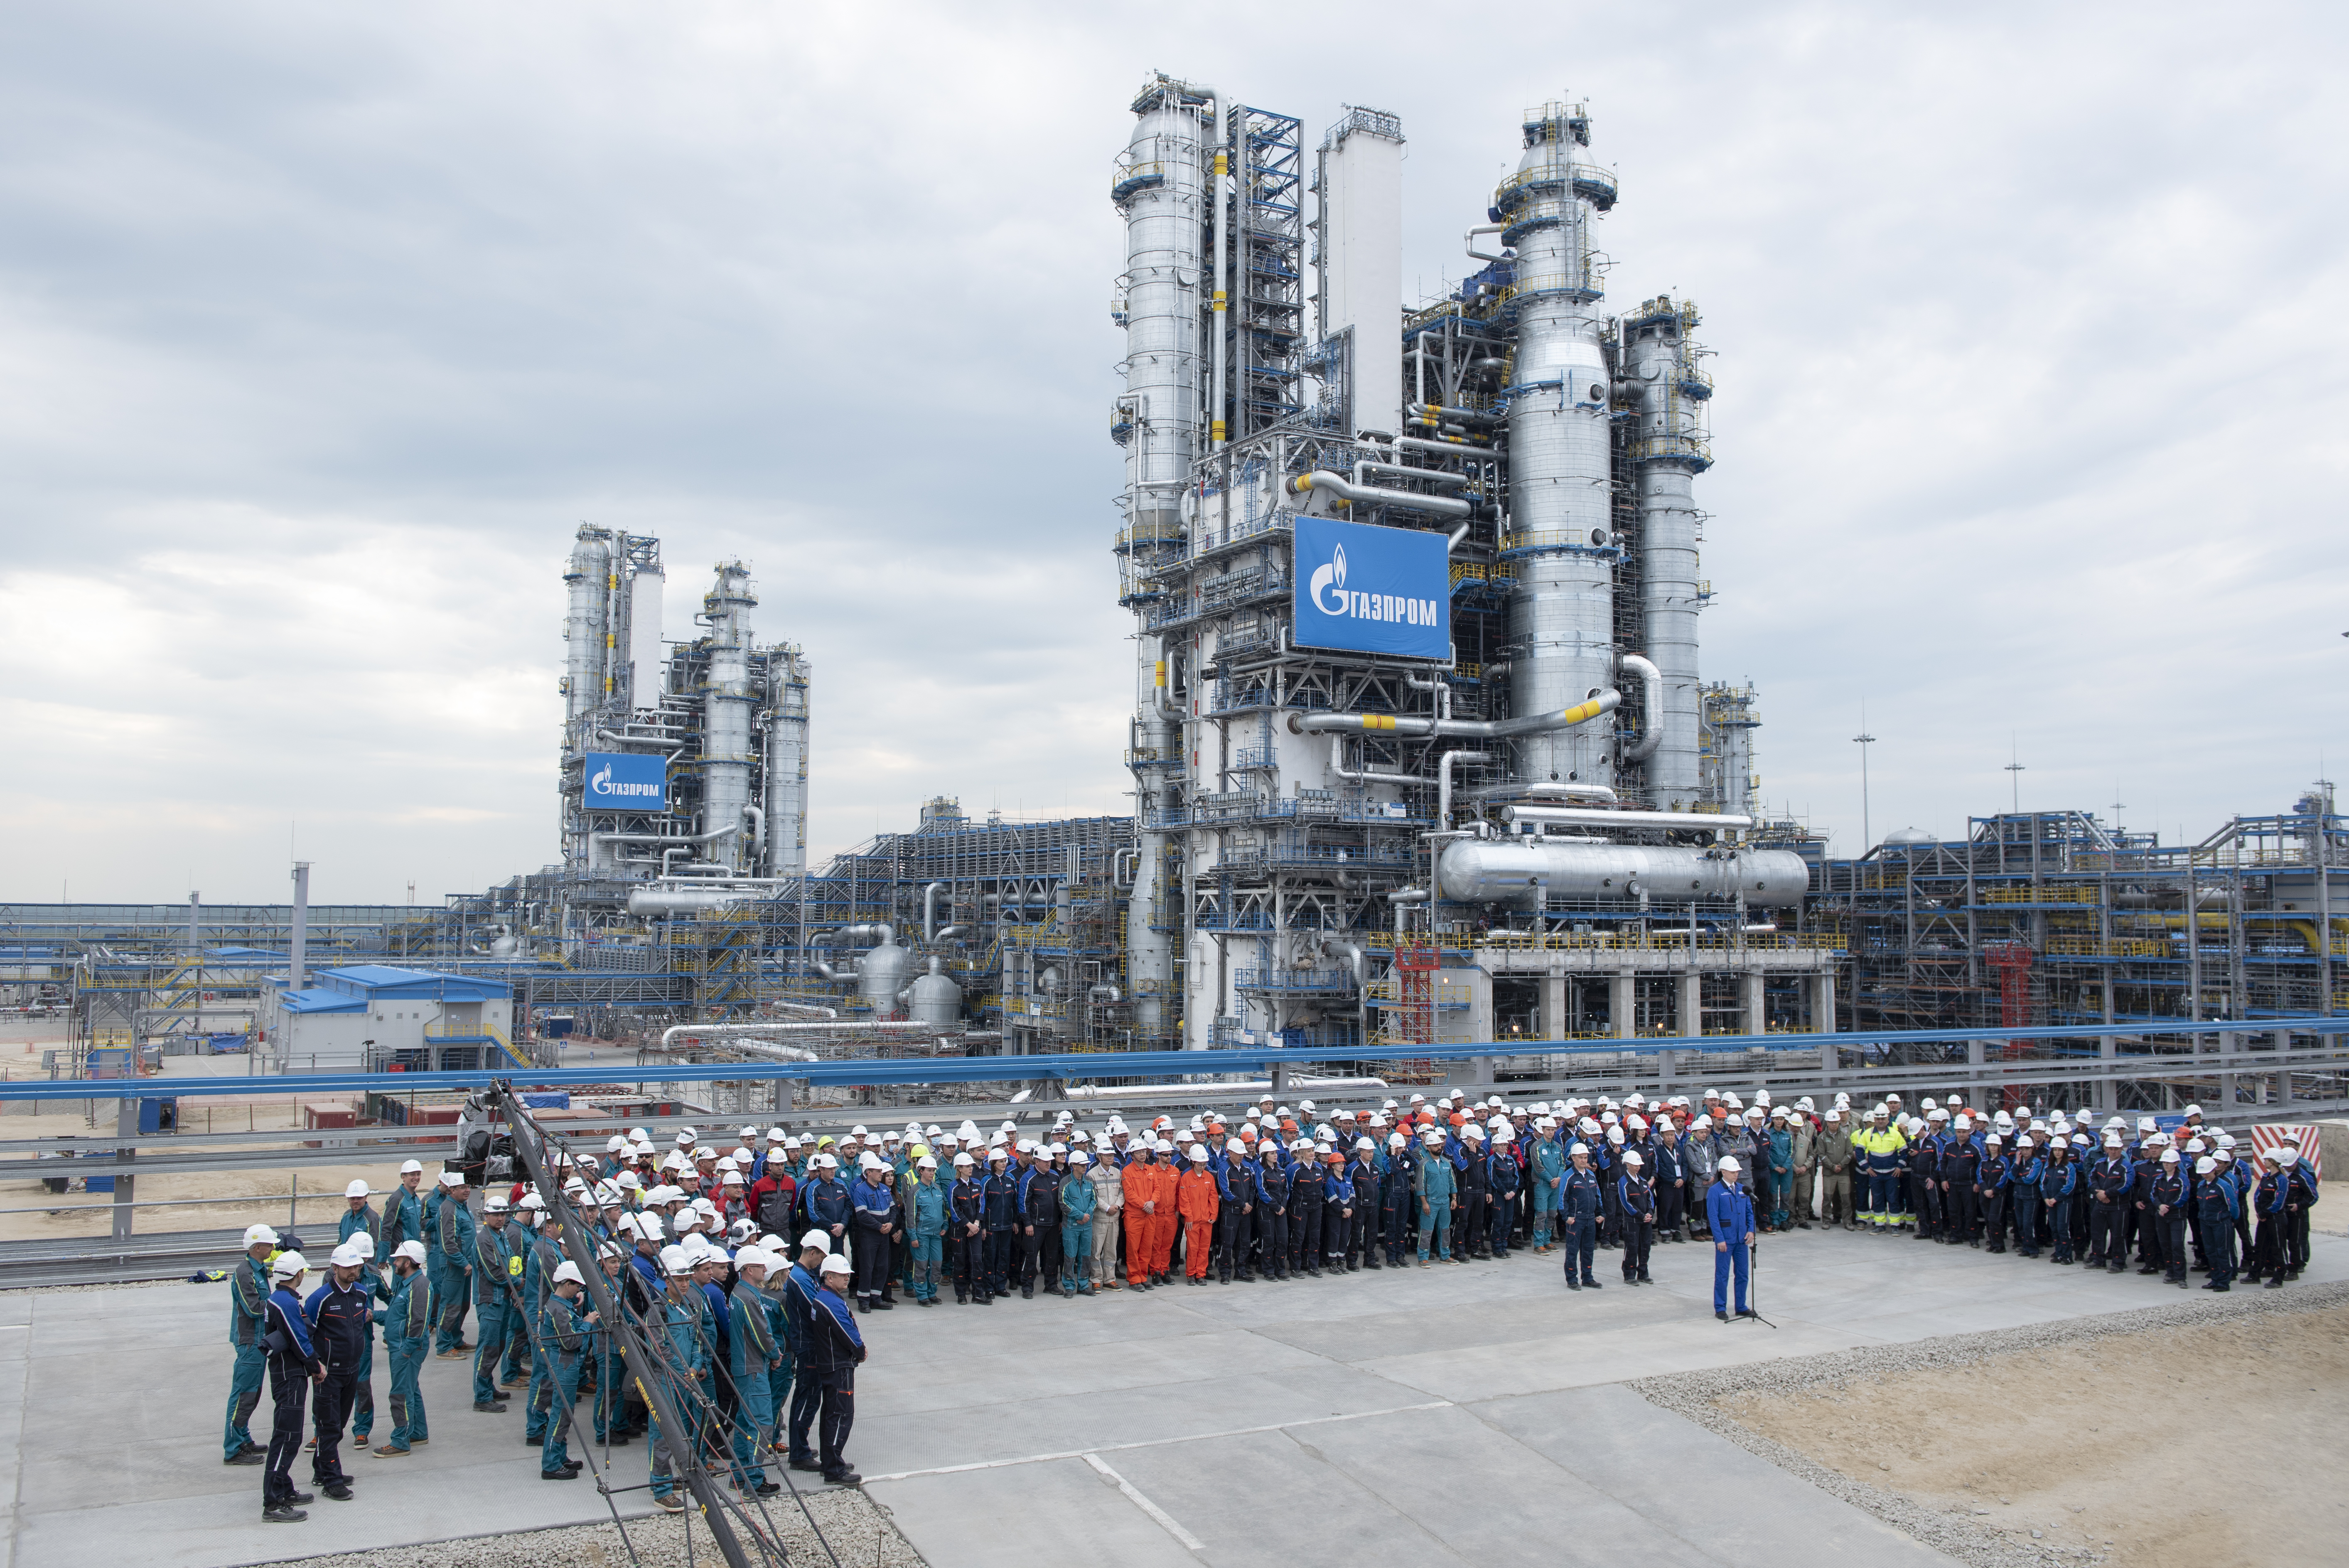 Gazprom Space Systems provided a range of communication services at the opening ceremony of the Amur Gas Processing Plant